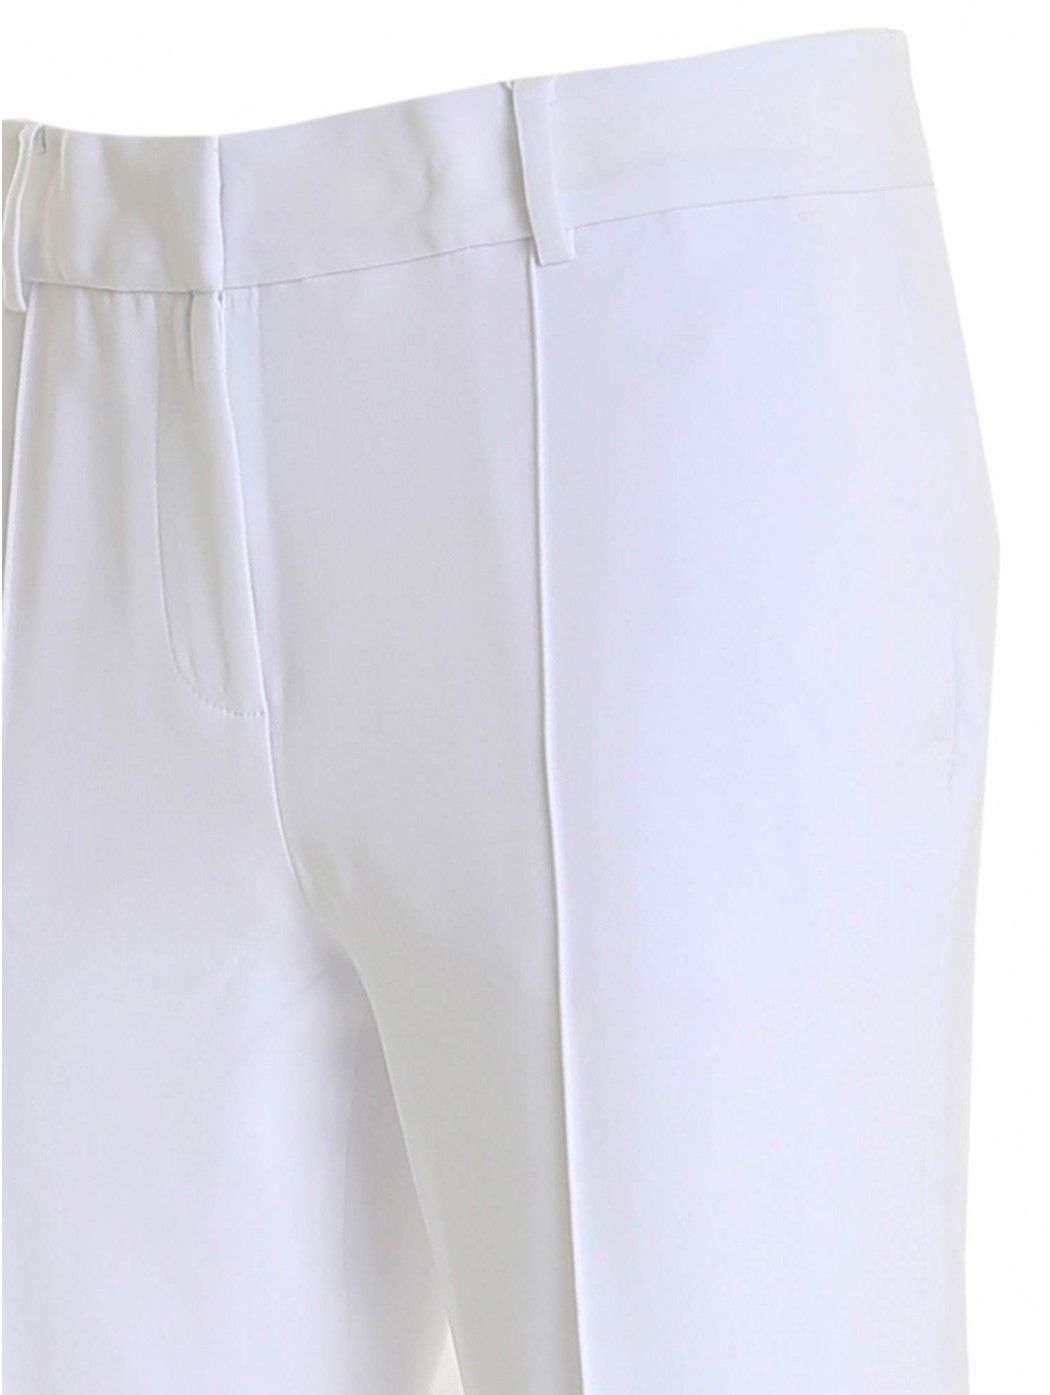 Anti-crease fabric trousers Color: white America pocket Belt loops Welt pockets on the back Zip, button and hooks closure  MICHA